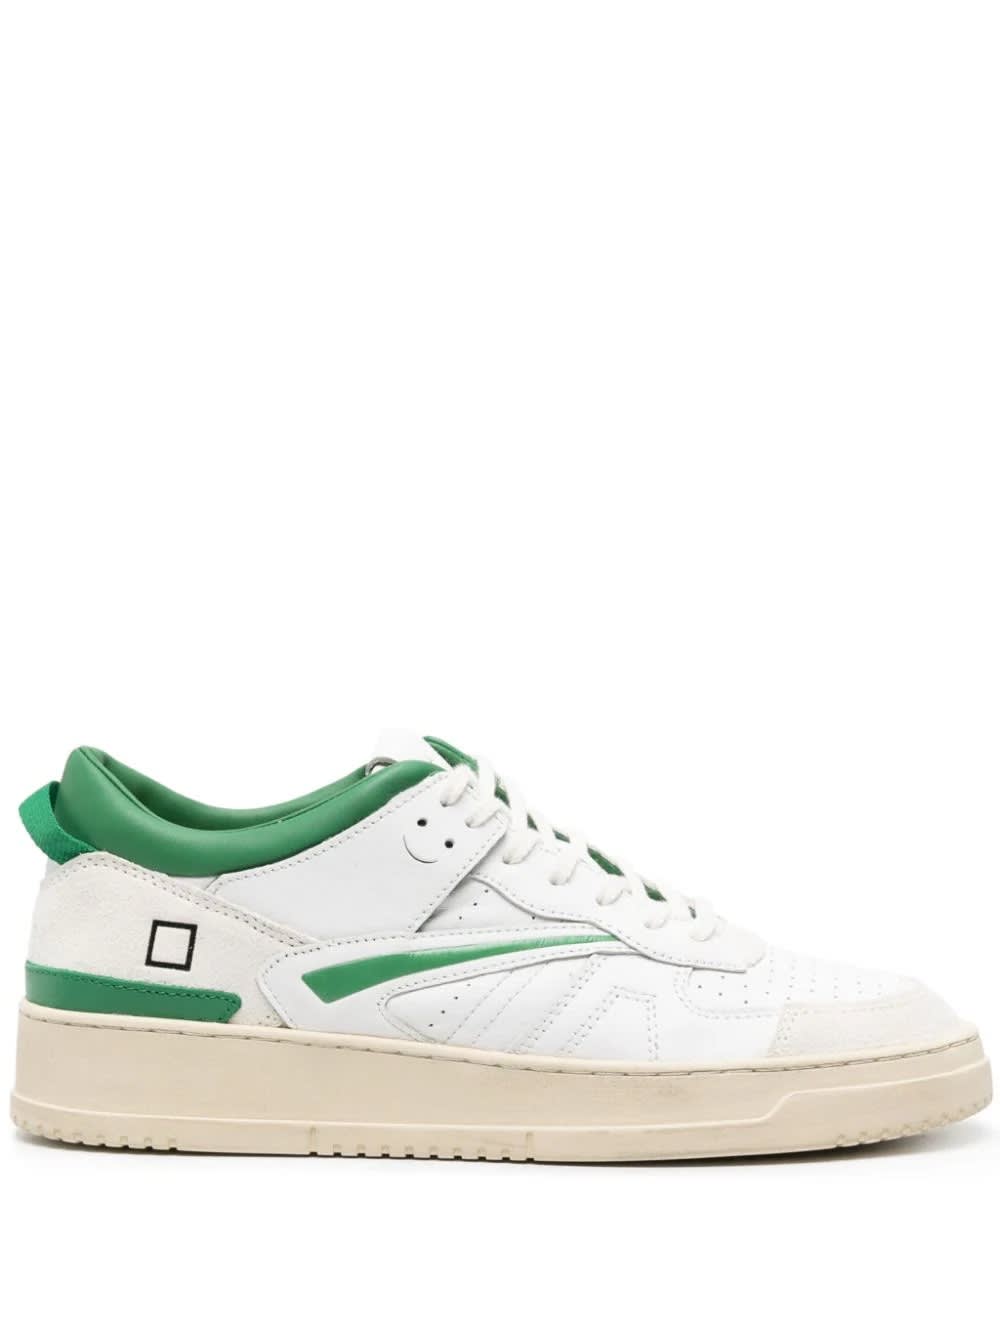 Shop Date White And Green Torneo Sneakers